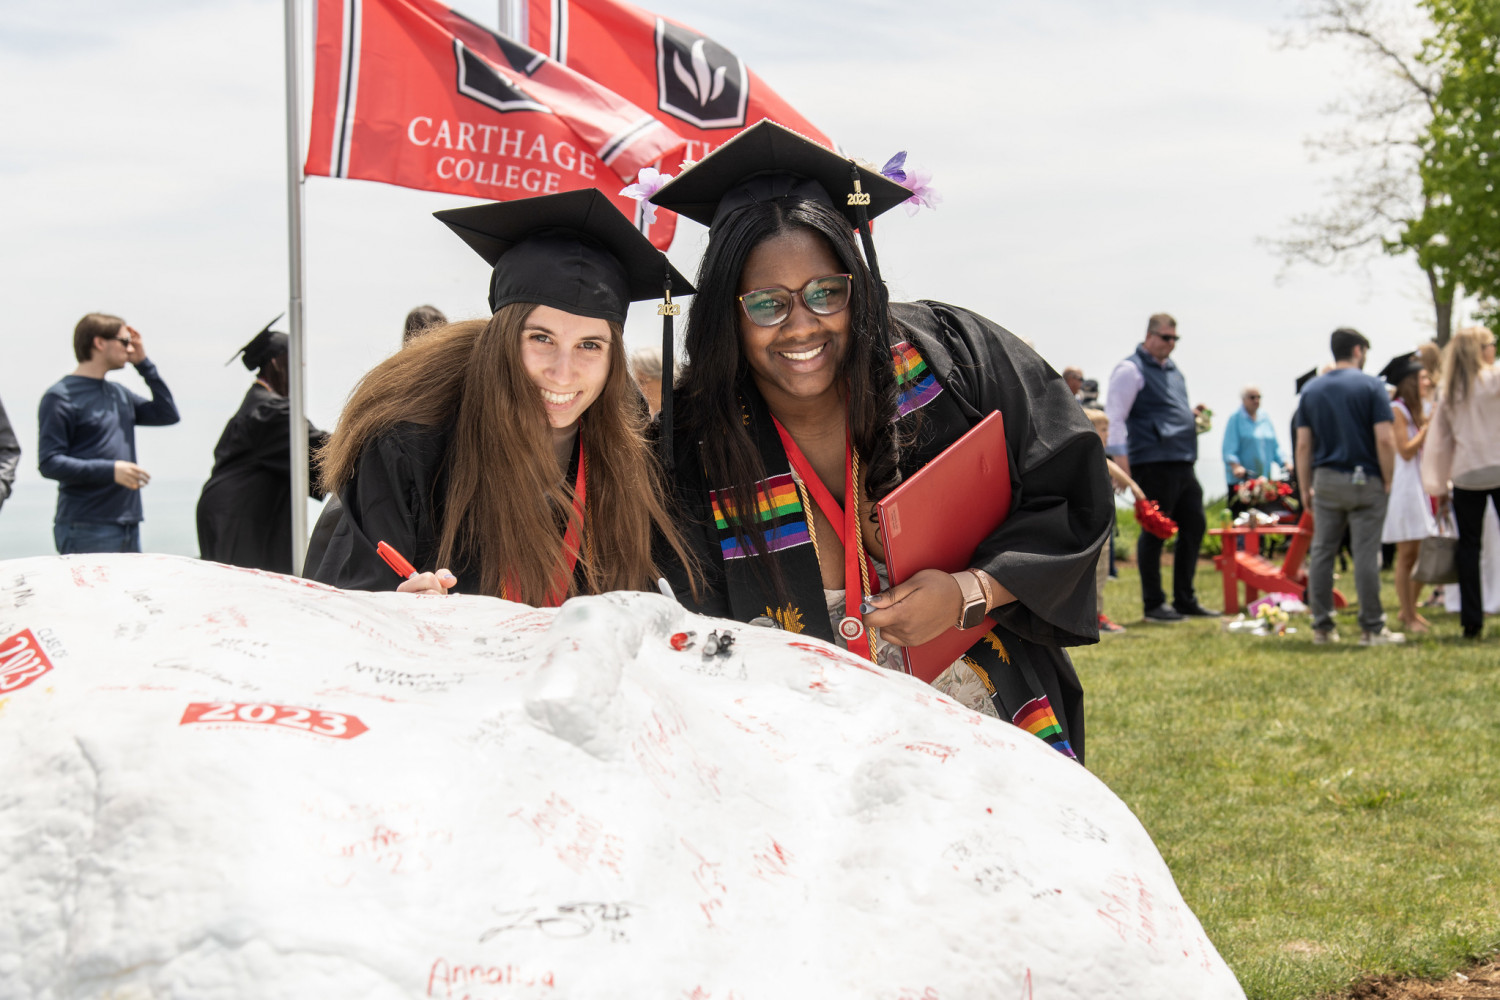 At the end of the Commencement Procession, Carthage graduates signed Kissing Rock and posed for p...